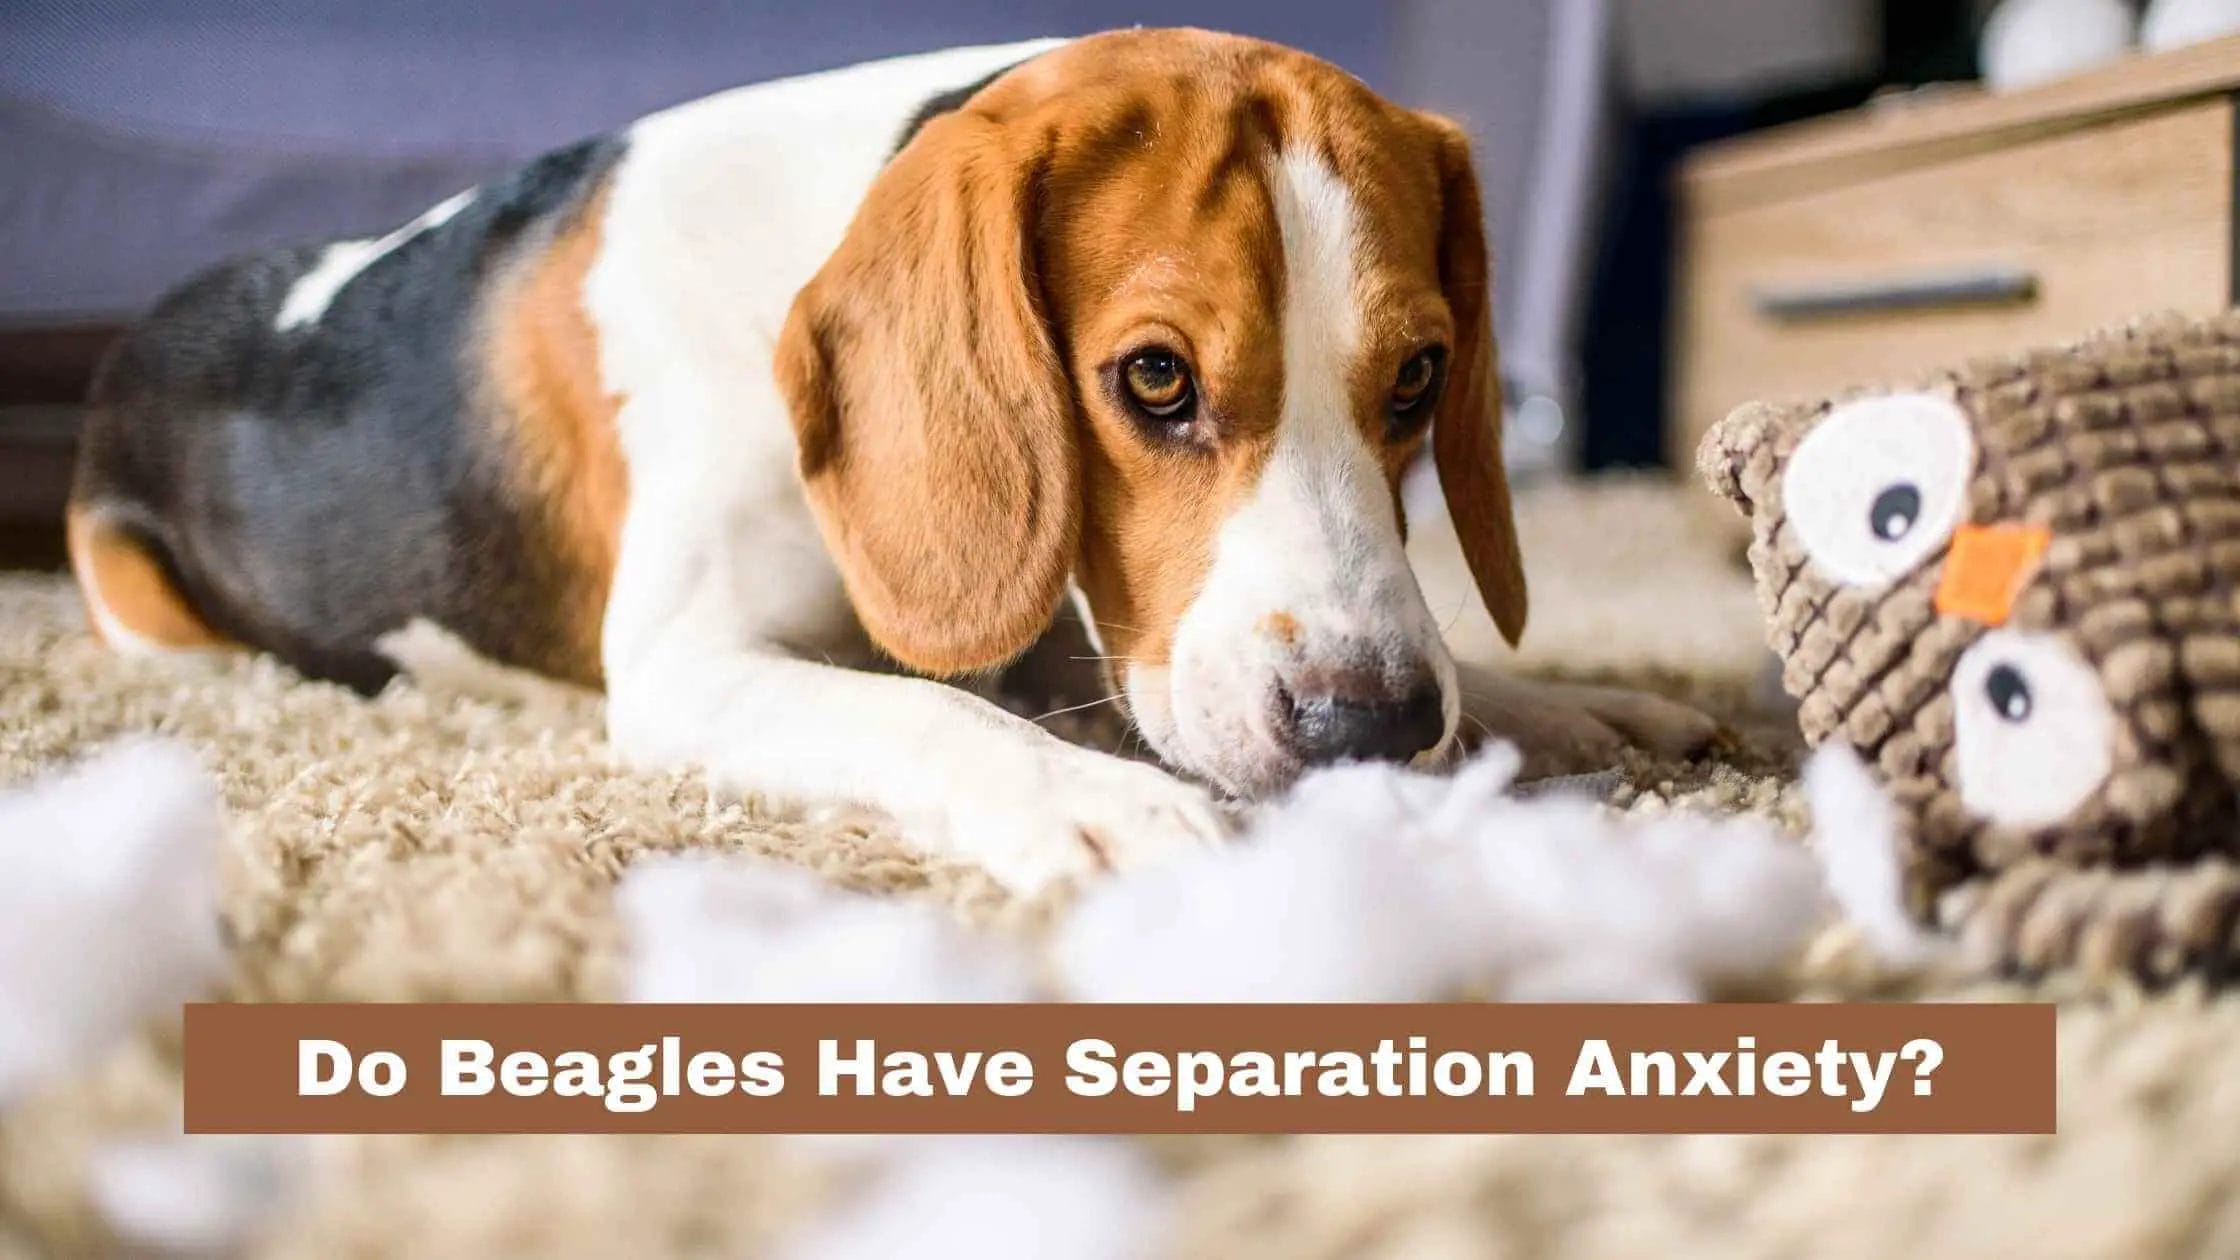 Do Beagles Have Separation Anxiety?